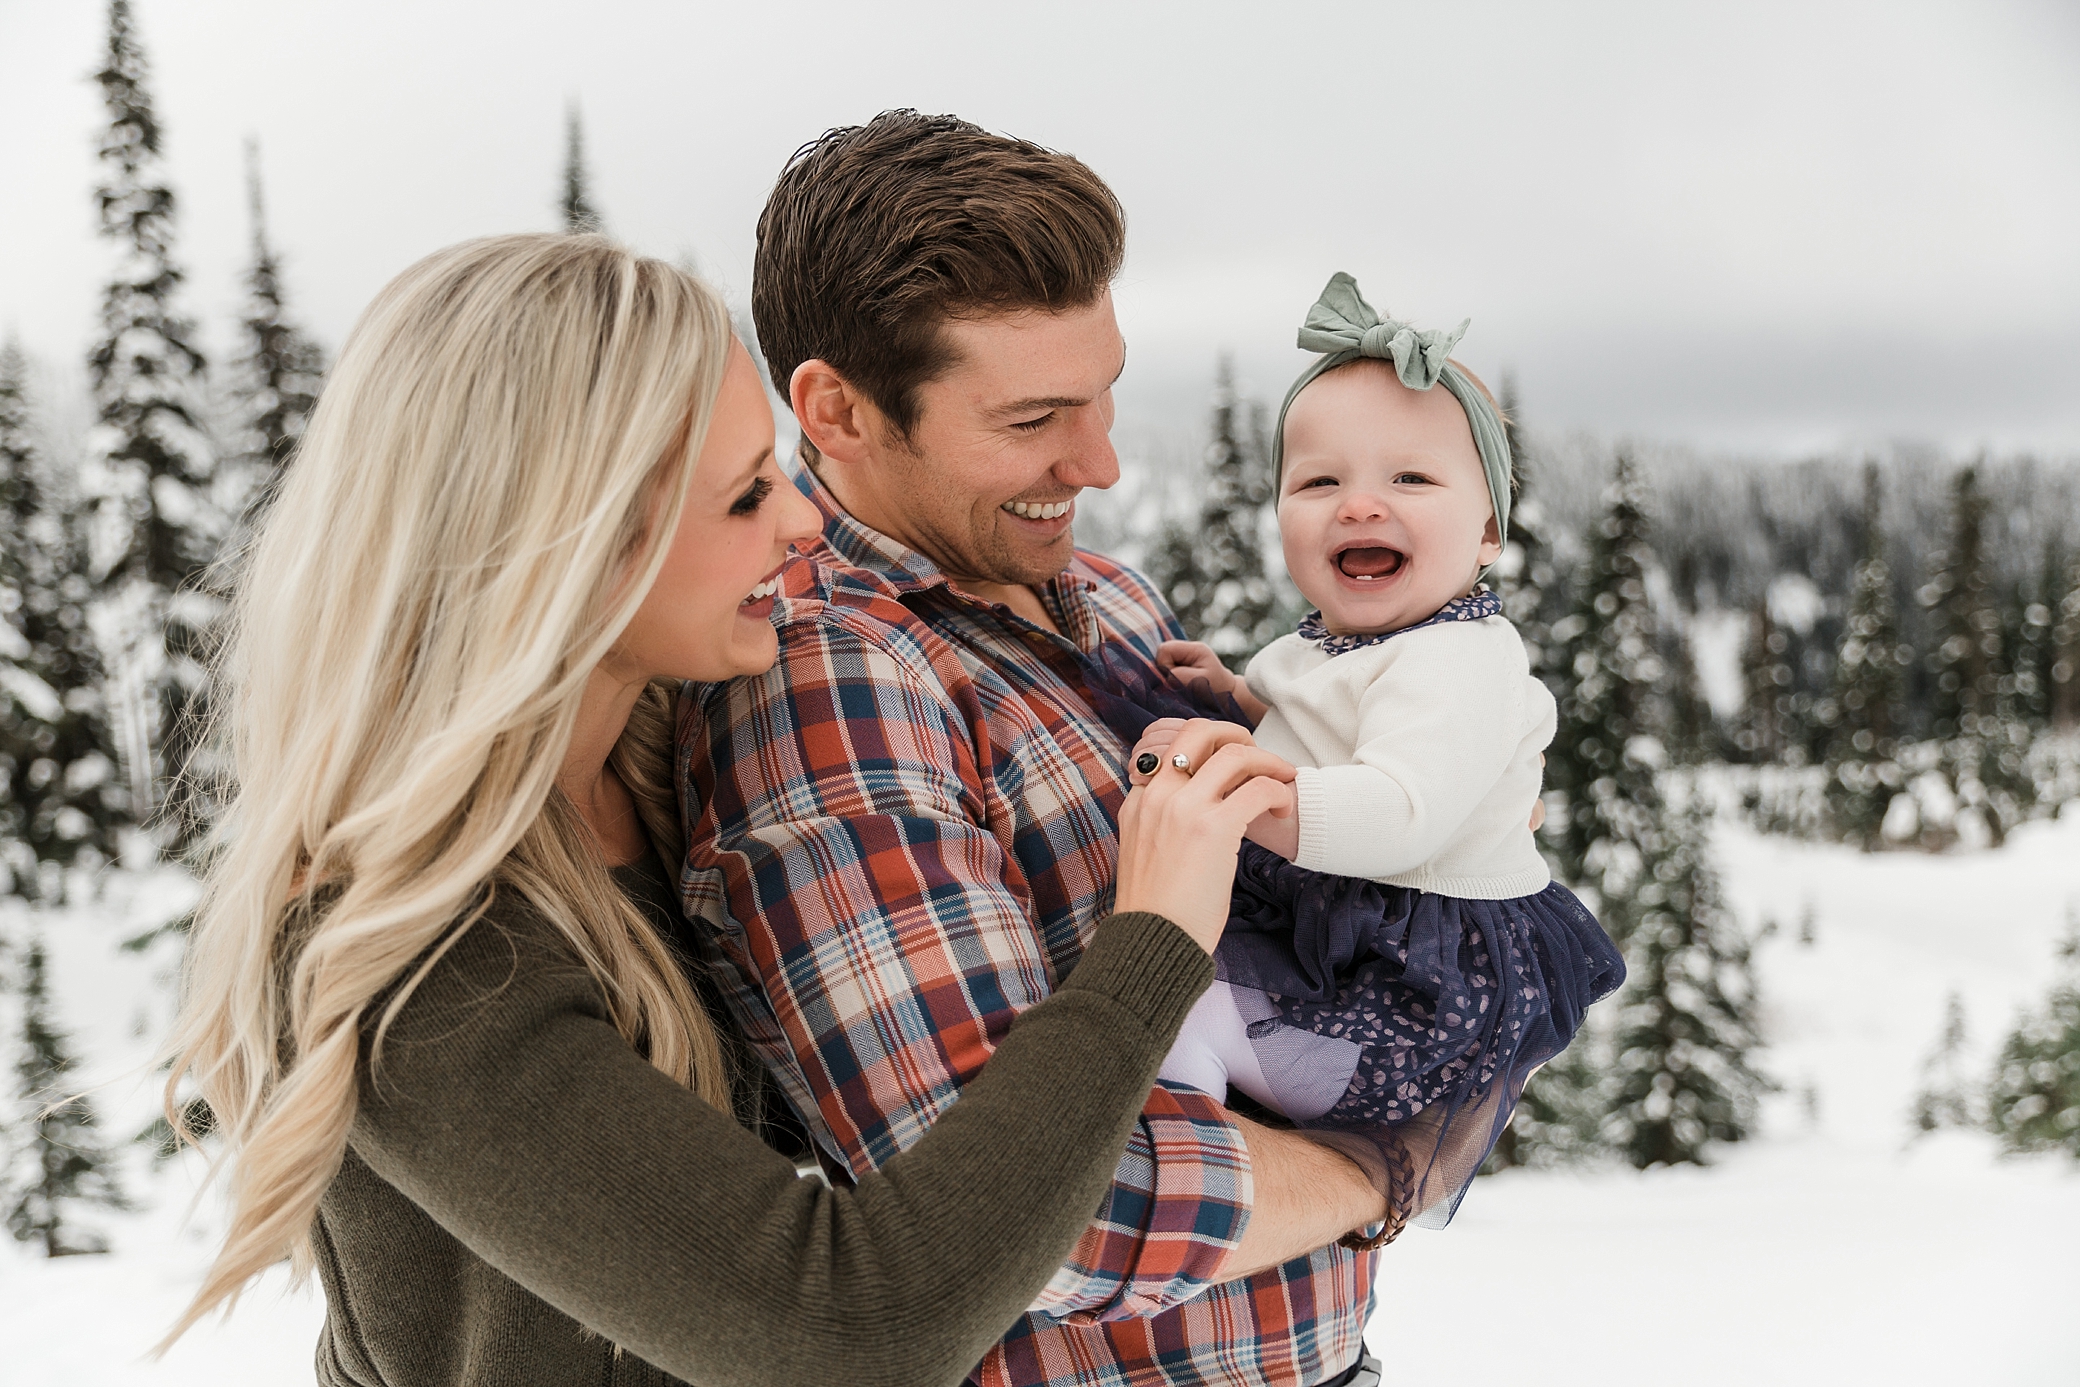 Family Photos with One Year Old | Megan Montalvo Photography 